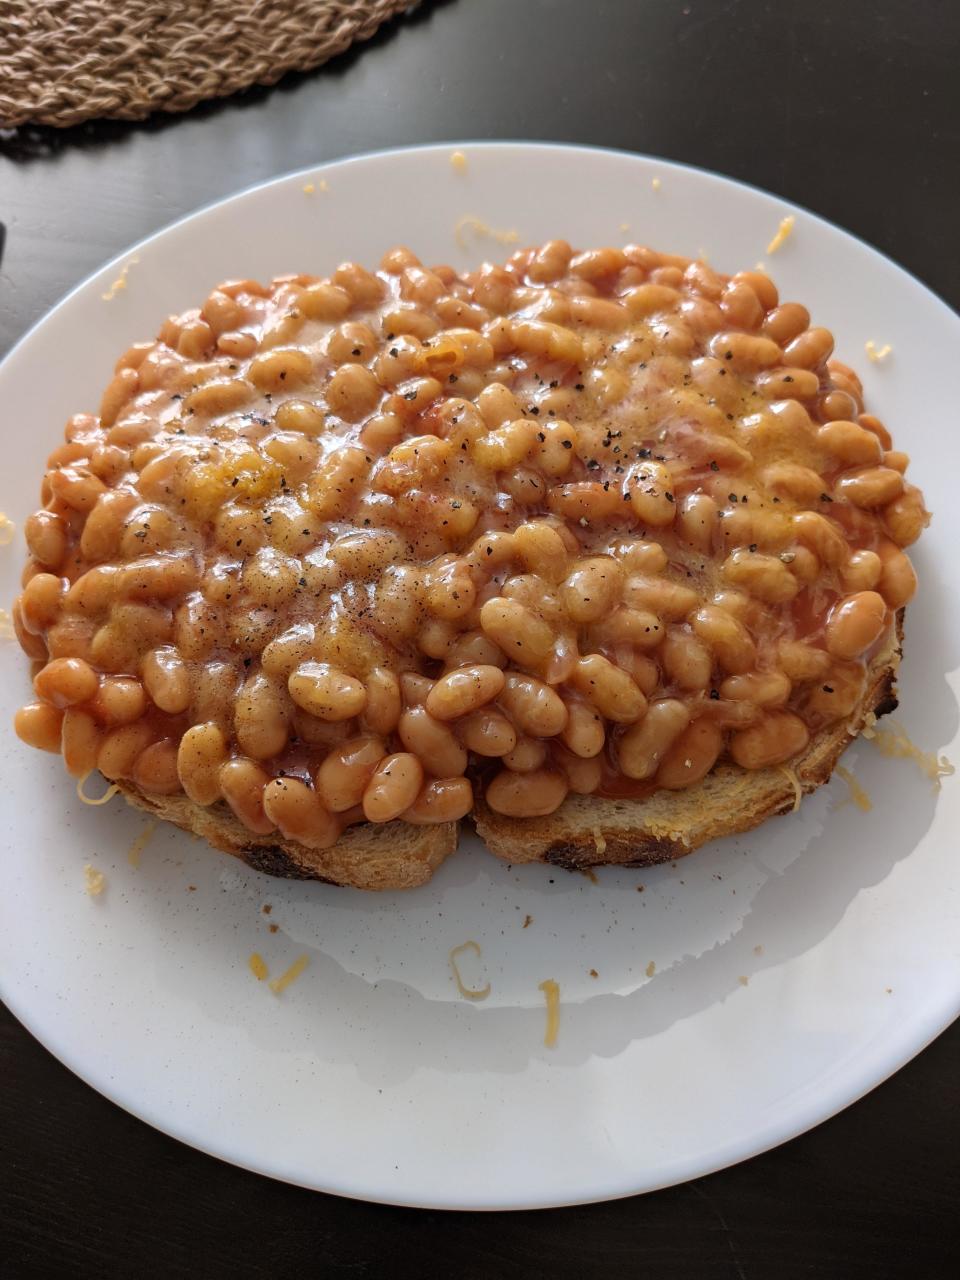 baked beans and shredded cheese on top a piece of toast